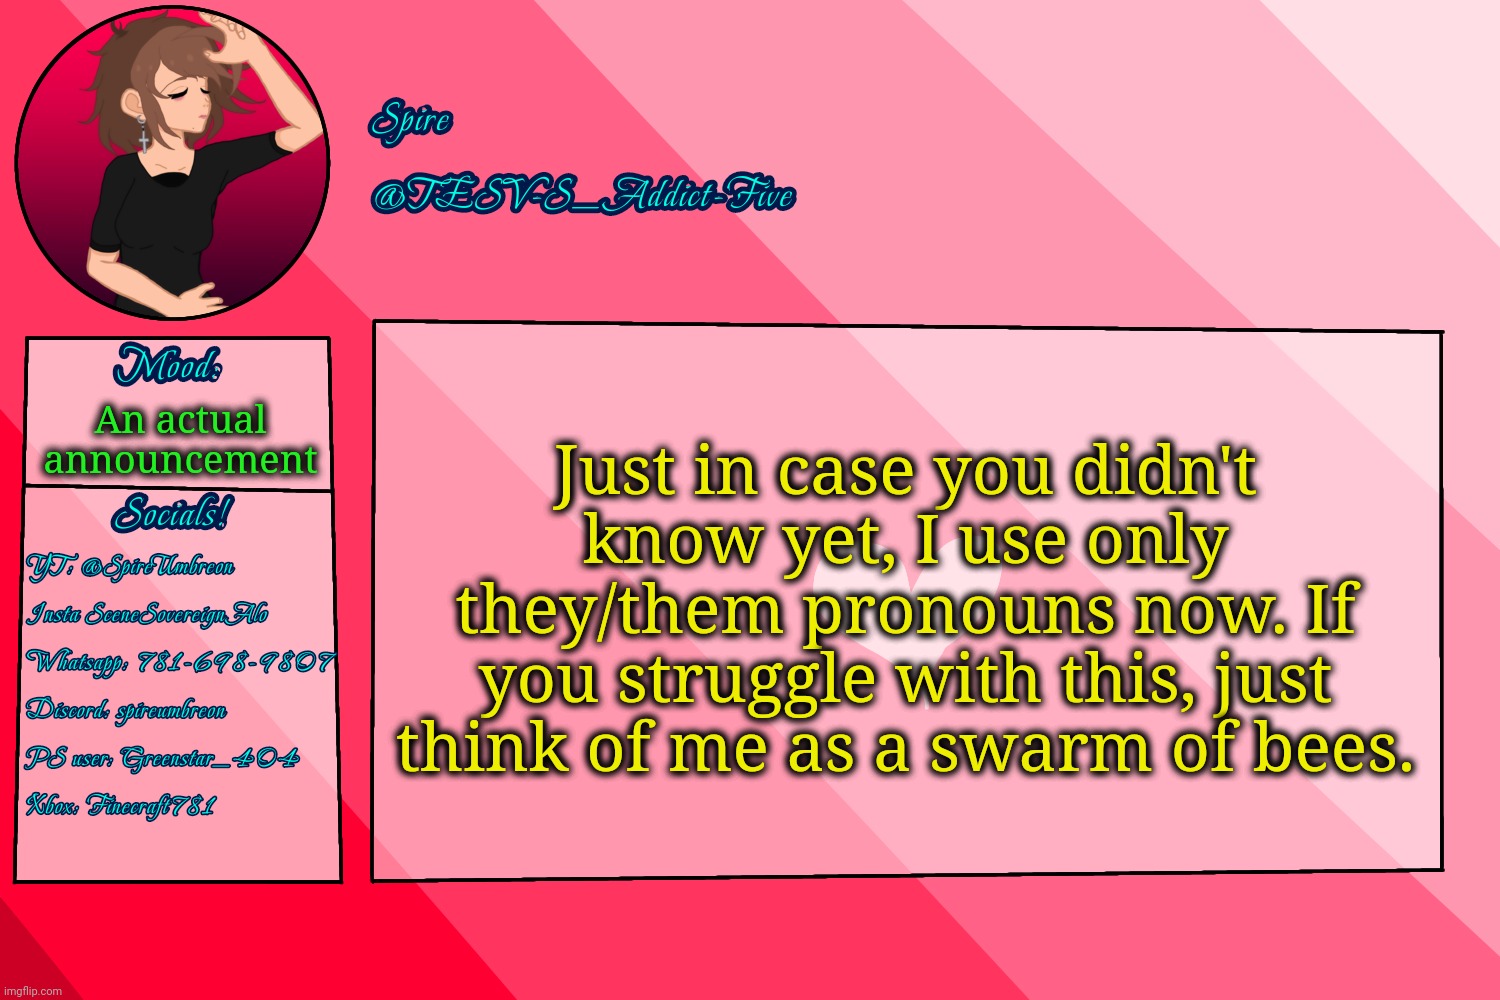 . | Just in case you didn't know yet, I use only they/them pronouns now. If you struggle with this, just think of me as a swarm of bees. An actual announcement | image tagged in tesv-s_addict-five announcement template | made w/ Imgflip meme maker